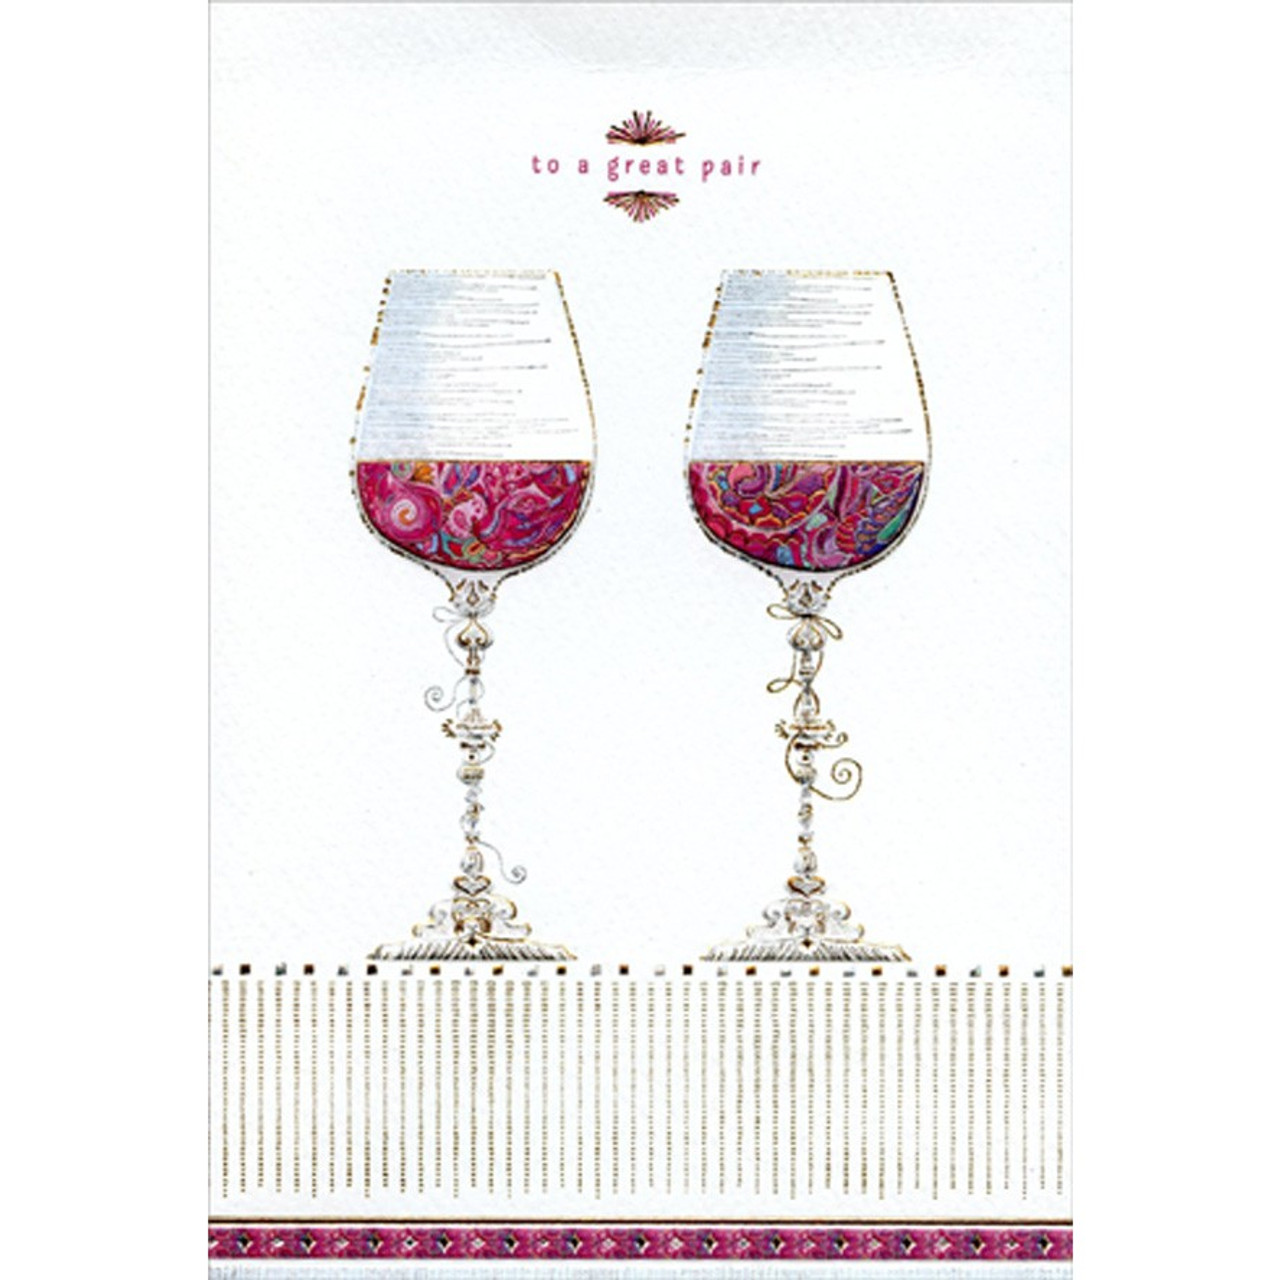 890 FANCY GLASS DECORATION ideas in 2023  decorated wine glasses, wedding  glasses, wedding wine glasses